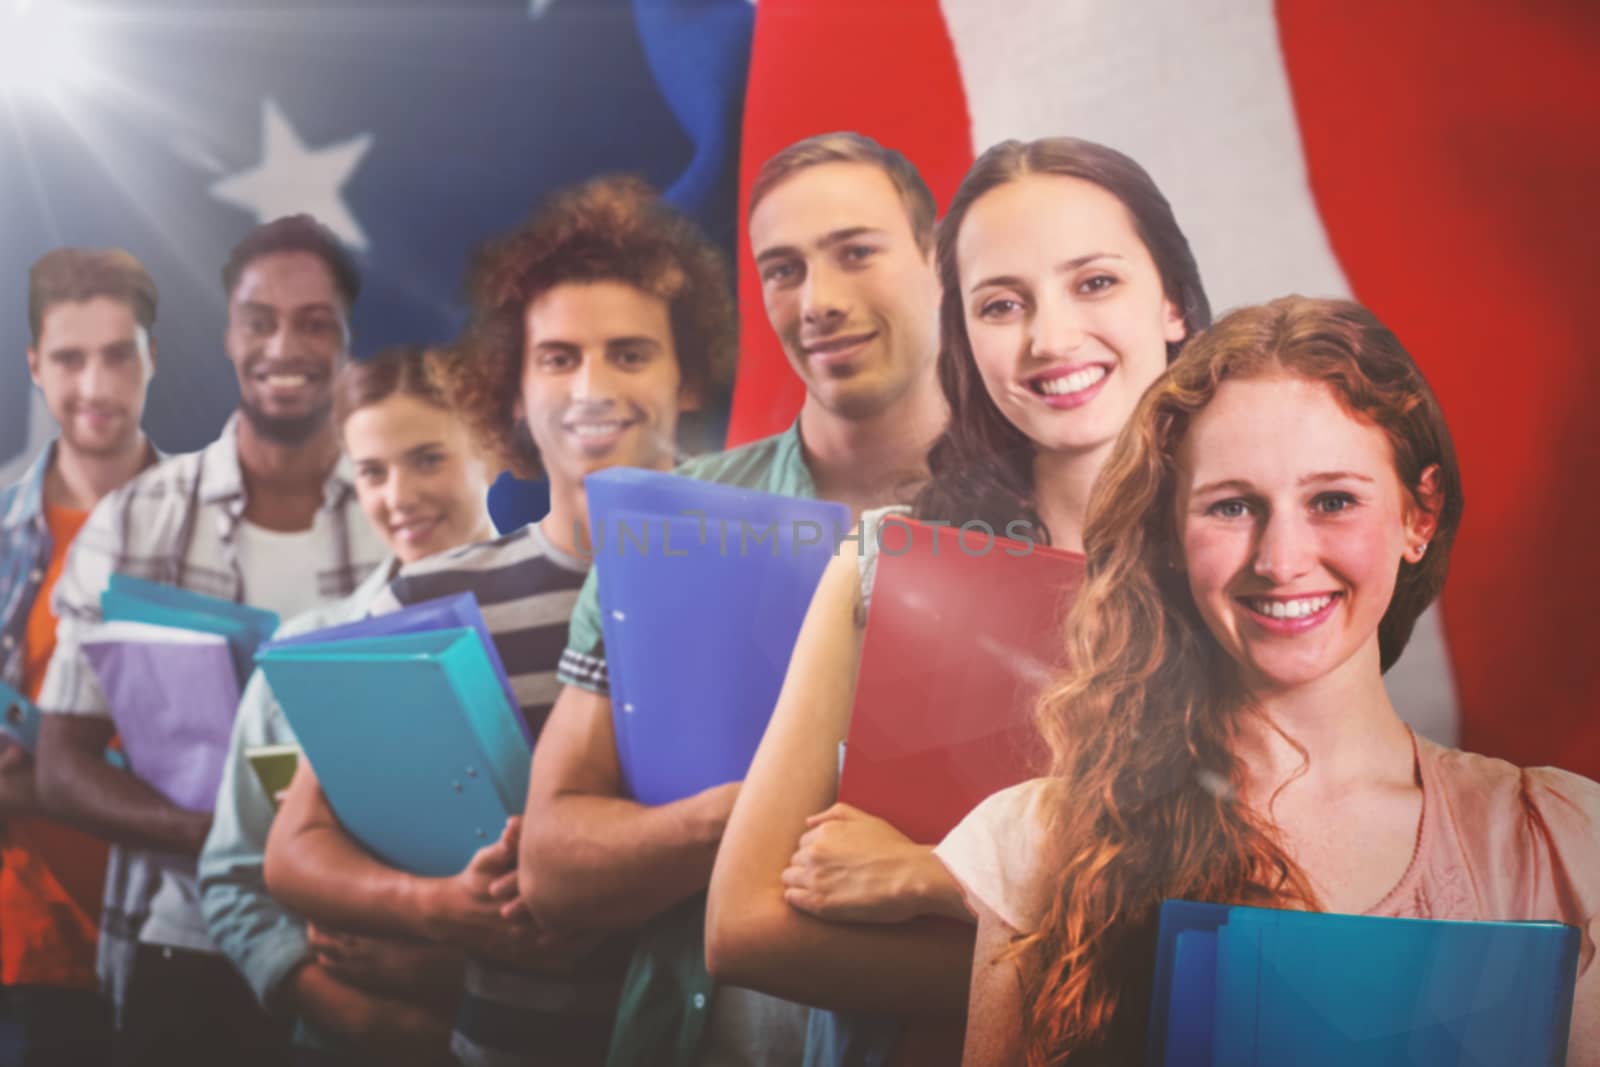 Fashion students smiling at camera together against crumbled american flag 